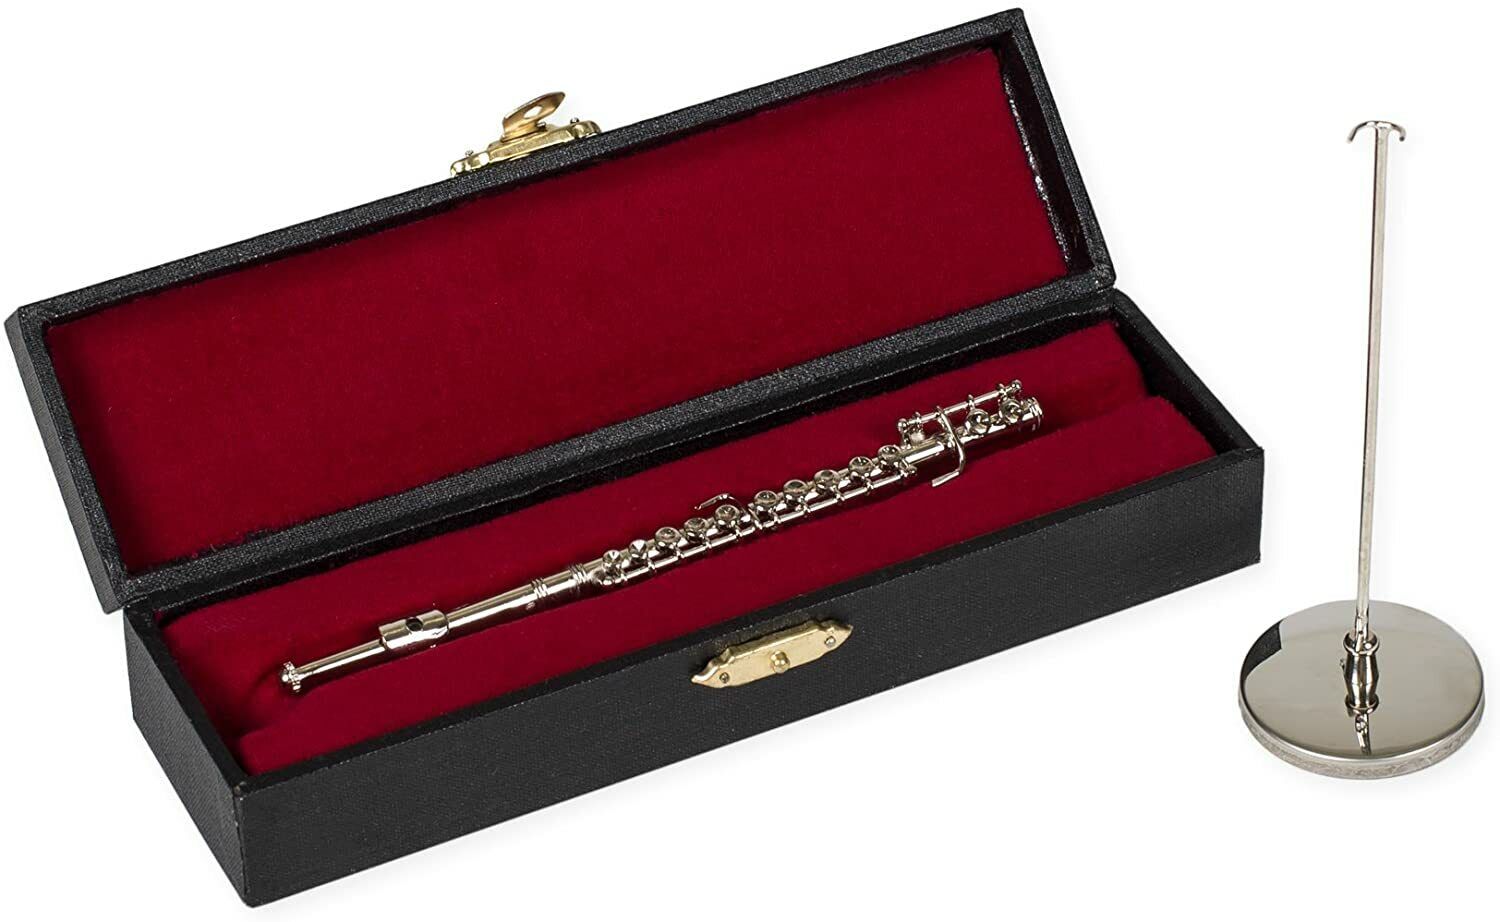 Silver Flute Music Instrument Miniature Replica with Case - Size 5.5 in